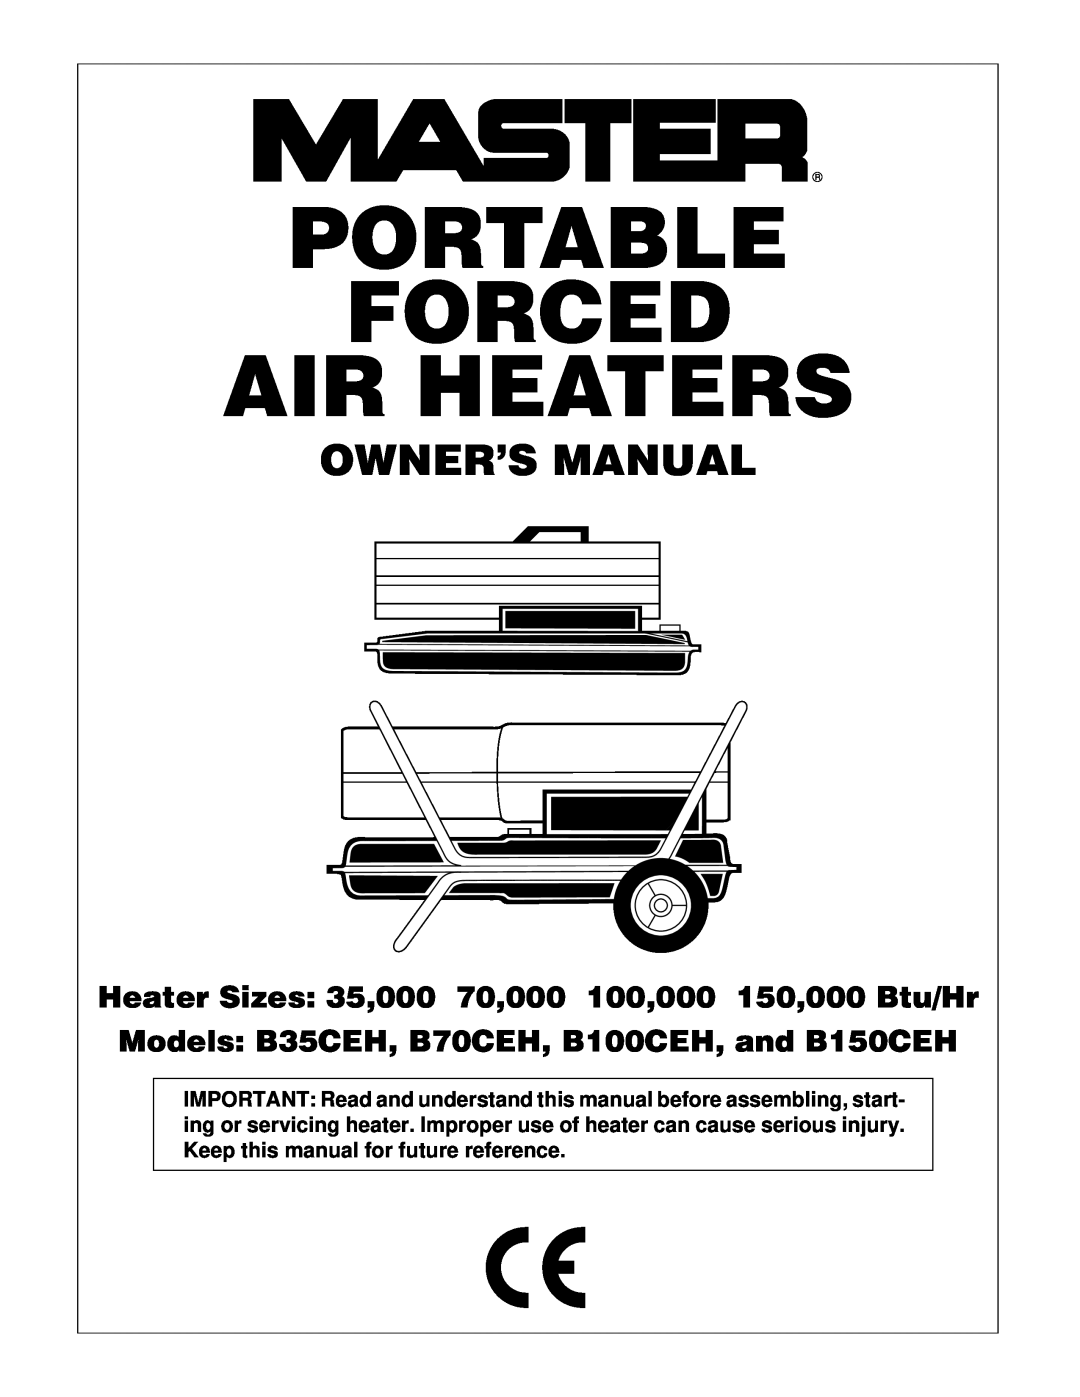 Master Lock owner manual Owner’S Manual, Models: B35CEH, B70CEH, B100CEH, and B150CEH, Portable Forced Air Heaters 